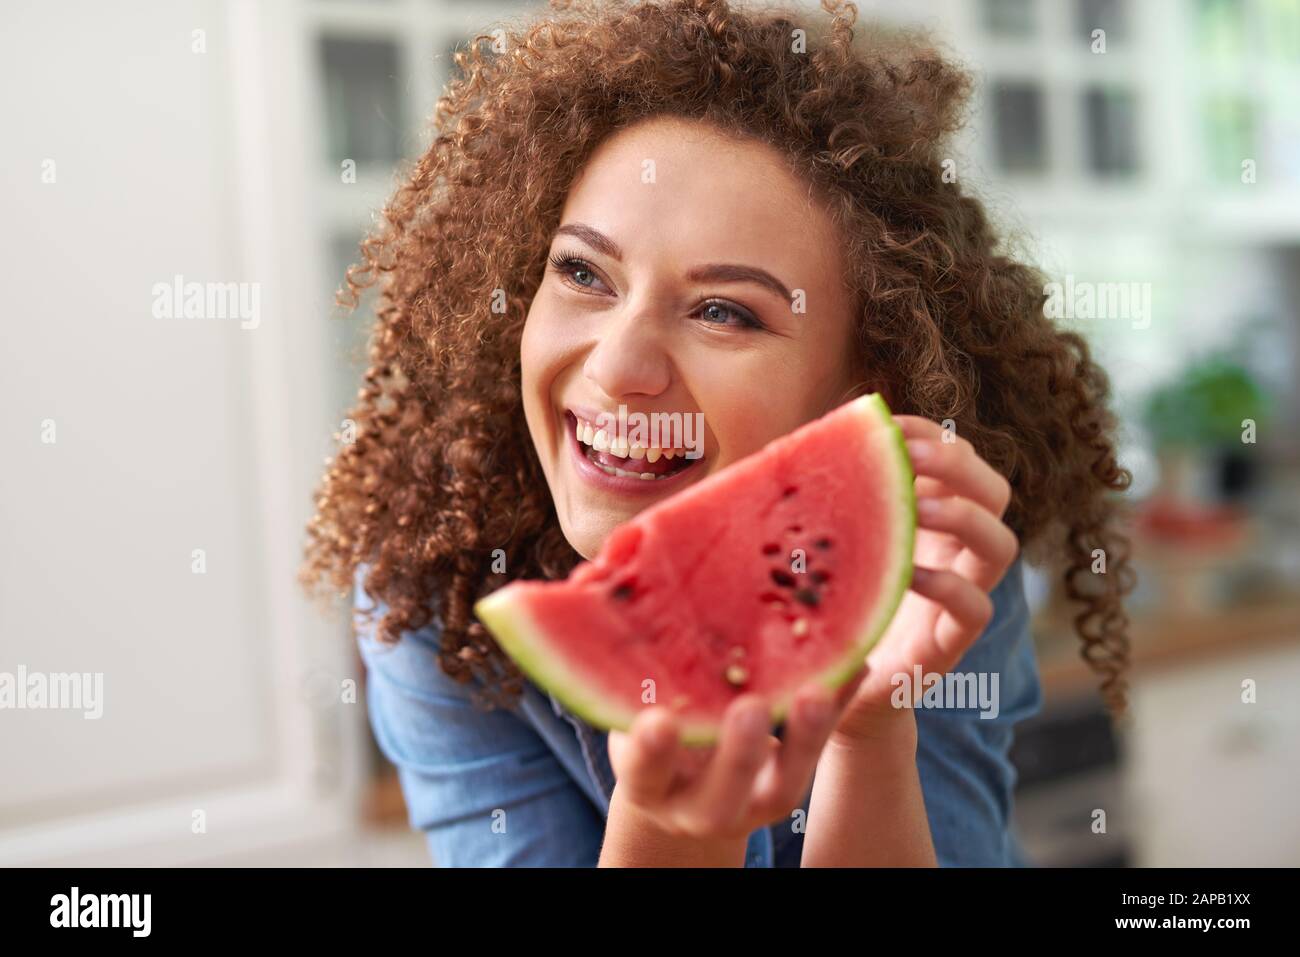 Woman with a slice of watermelon Stock Photo